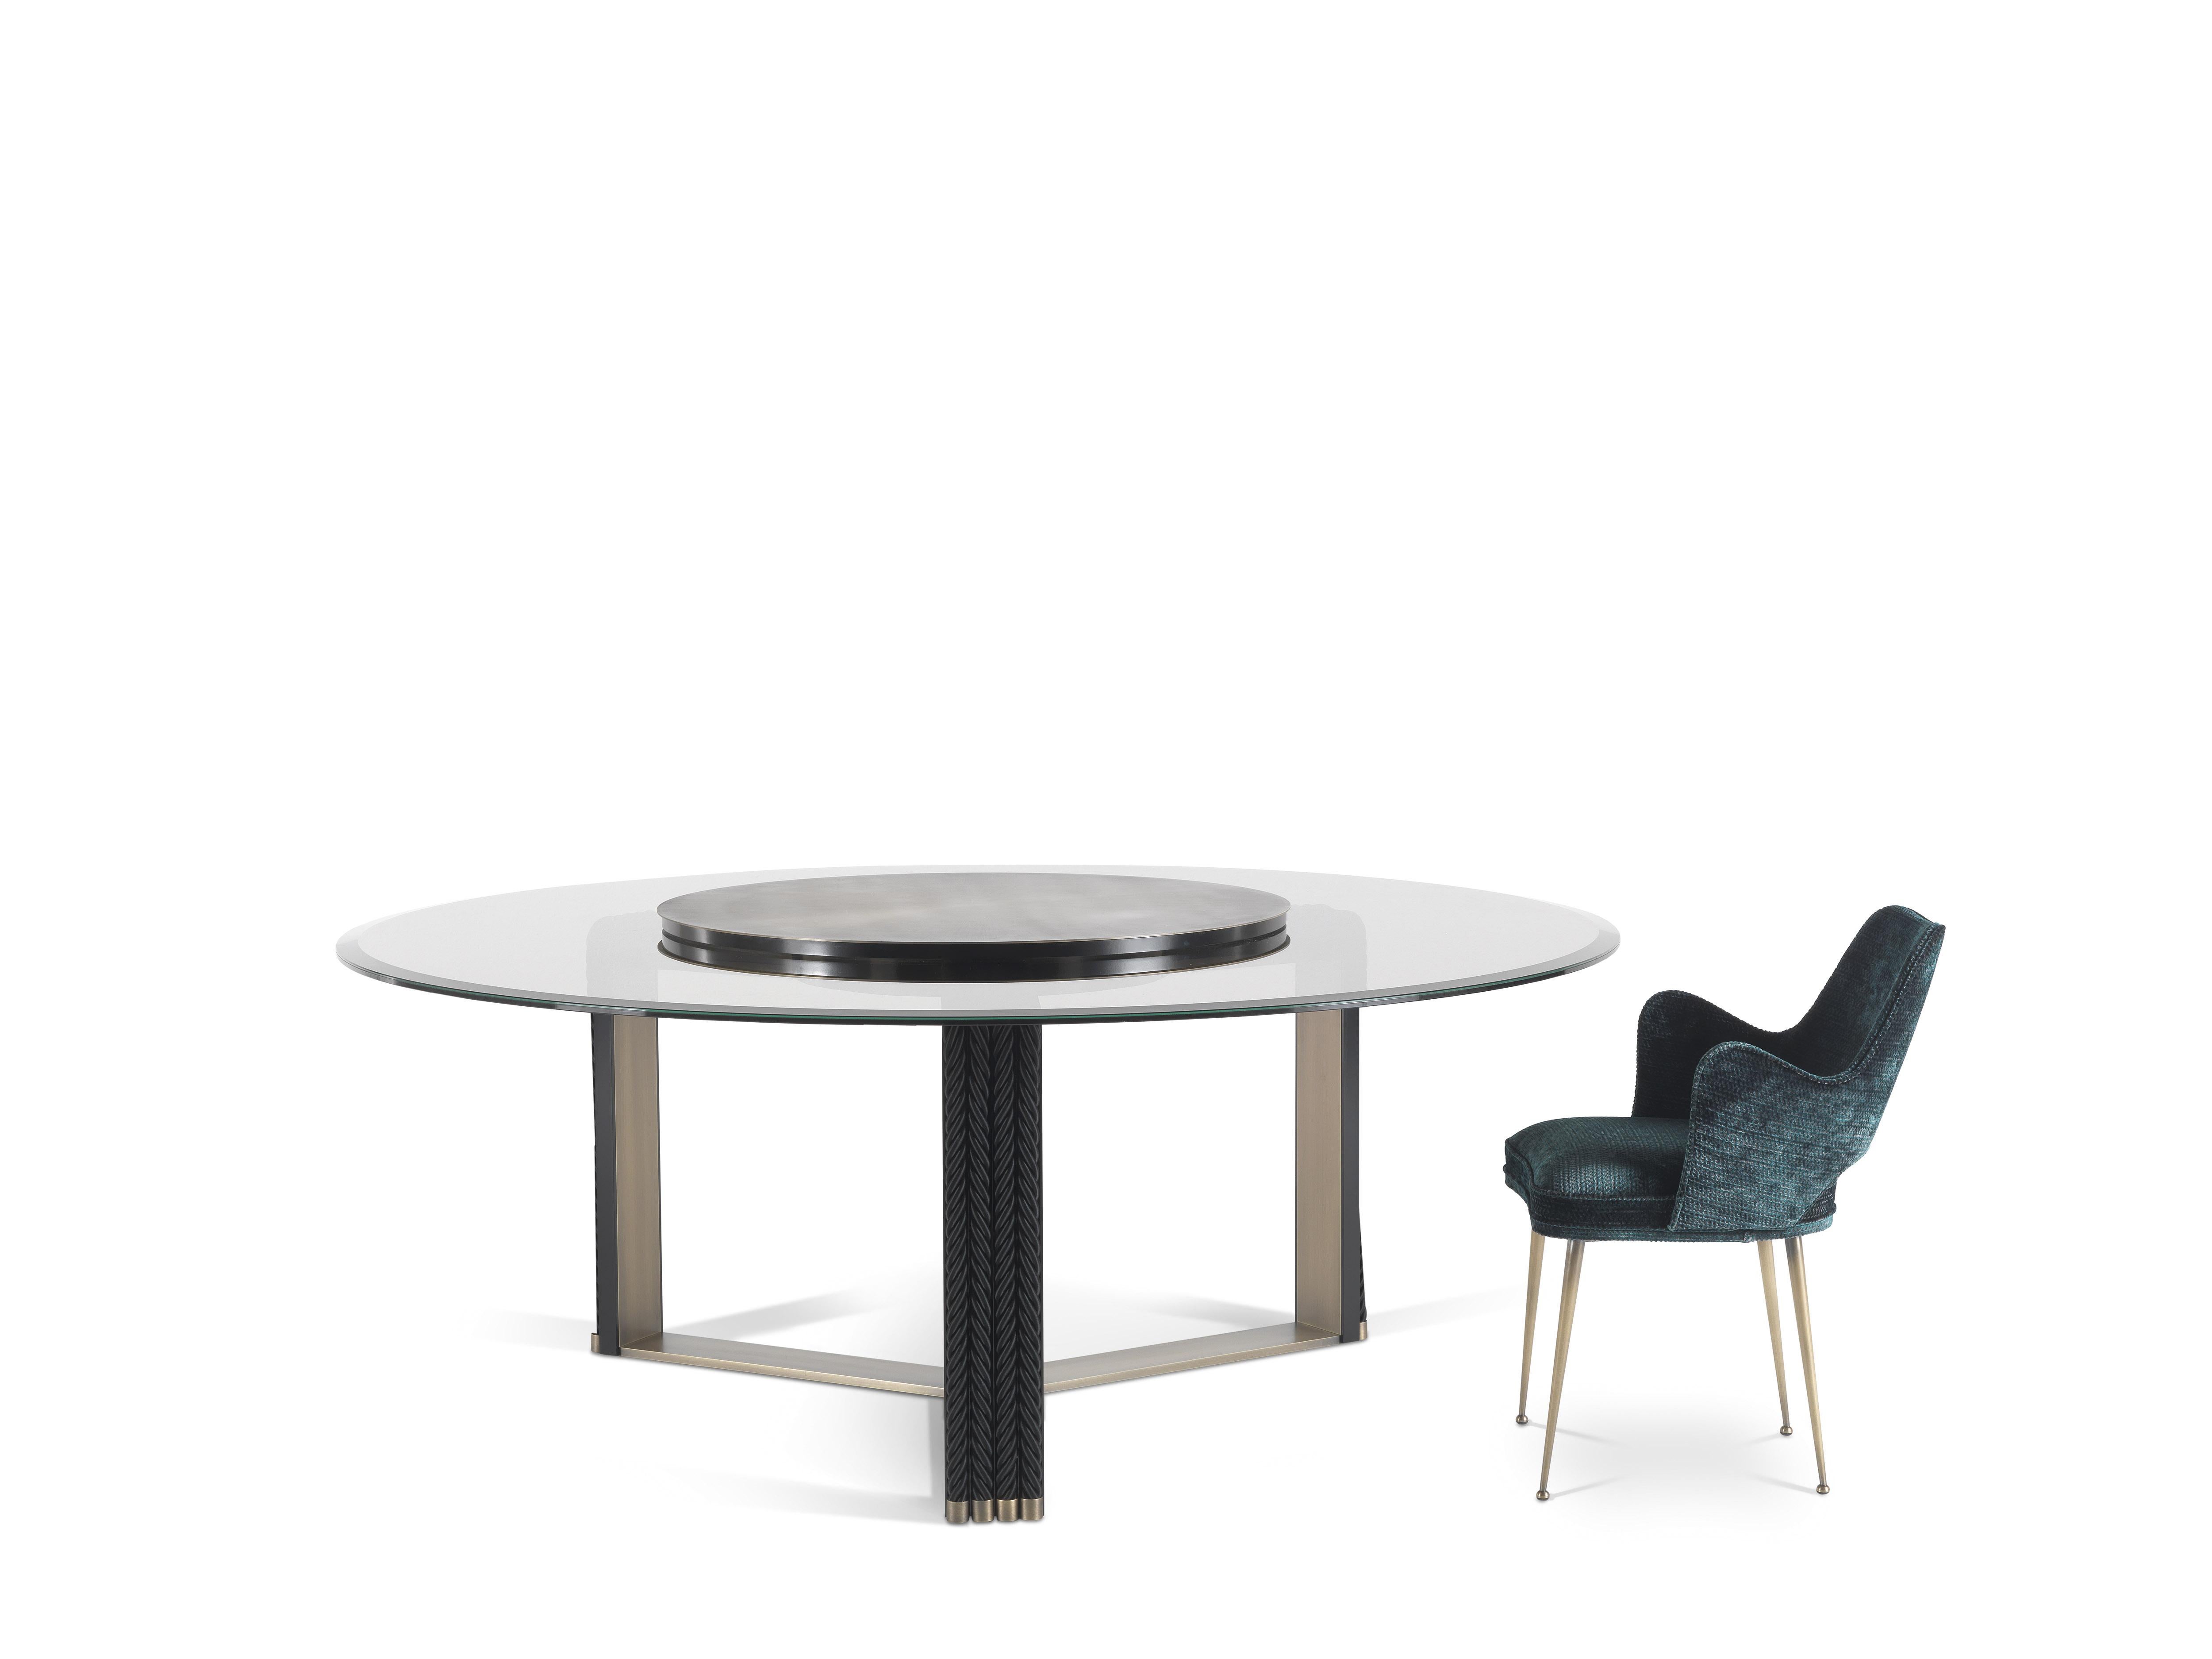 Protagonist of the dining room, the imposing Glasgow table has a coupled and ground bronzed glass top, anchored to a brass disc and equipped with removable Lazy Susan. The unique base in bronzed brass consists of a single piece structured on three